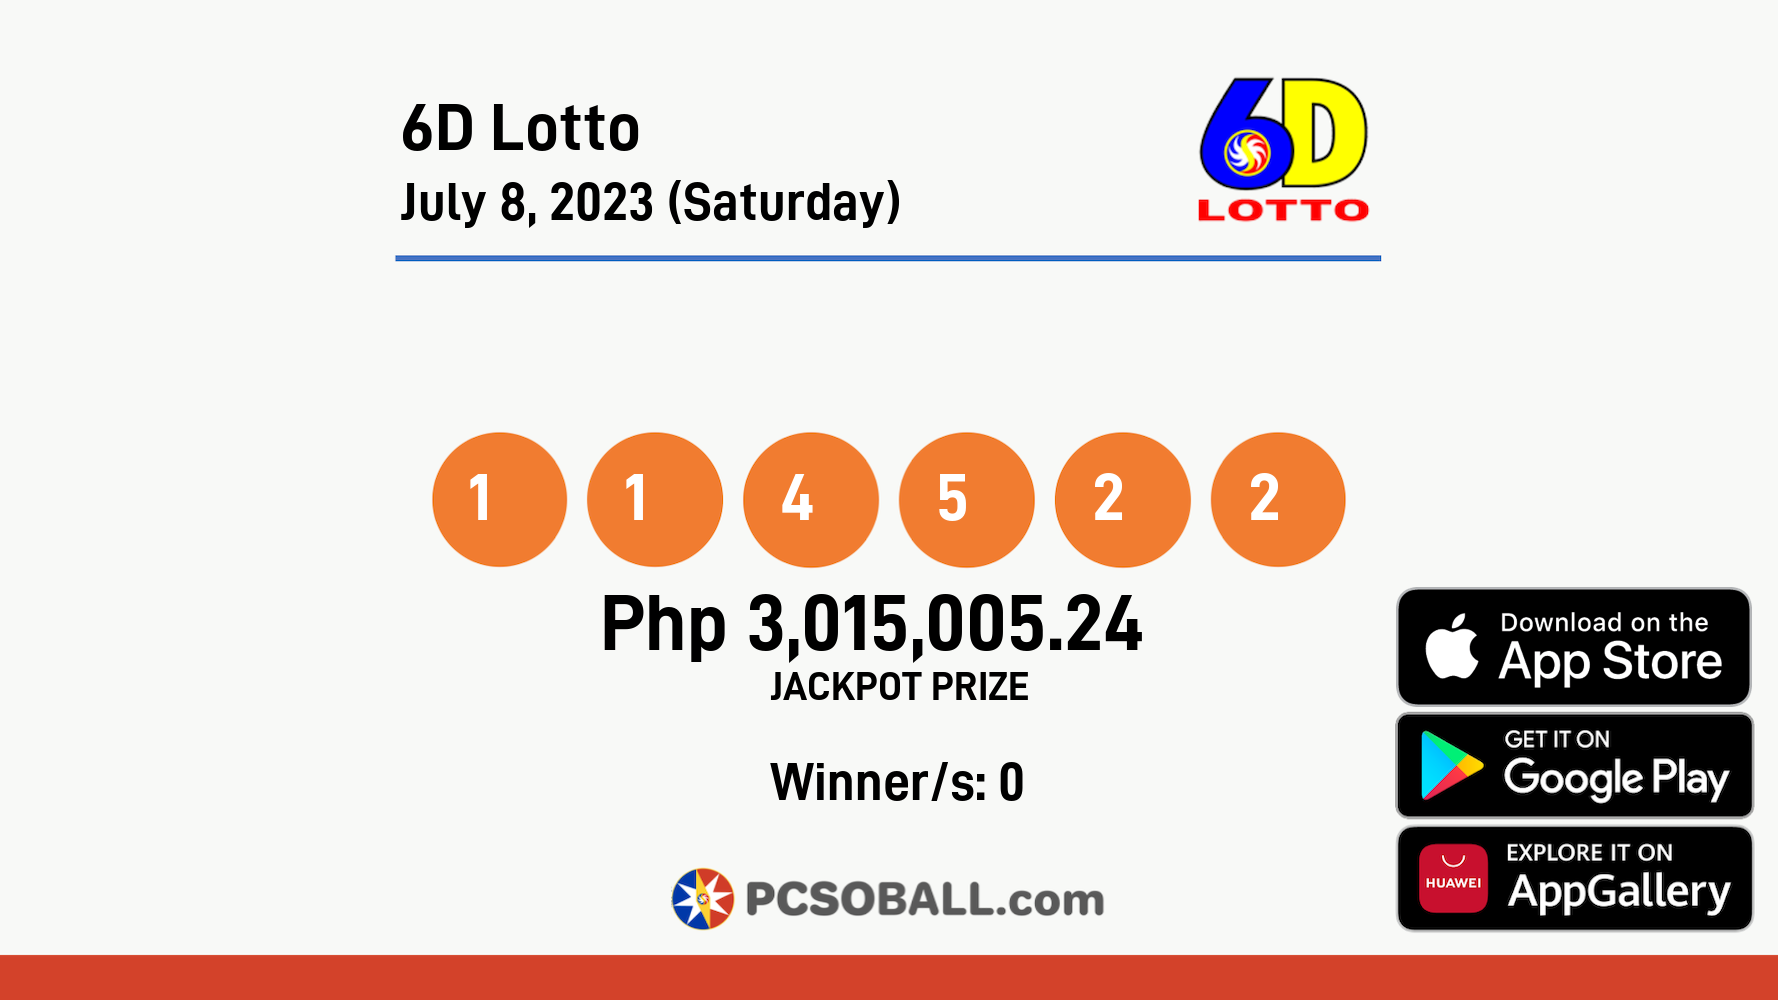 6D Lotto July 8, 2023 (Saturday) Result